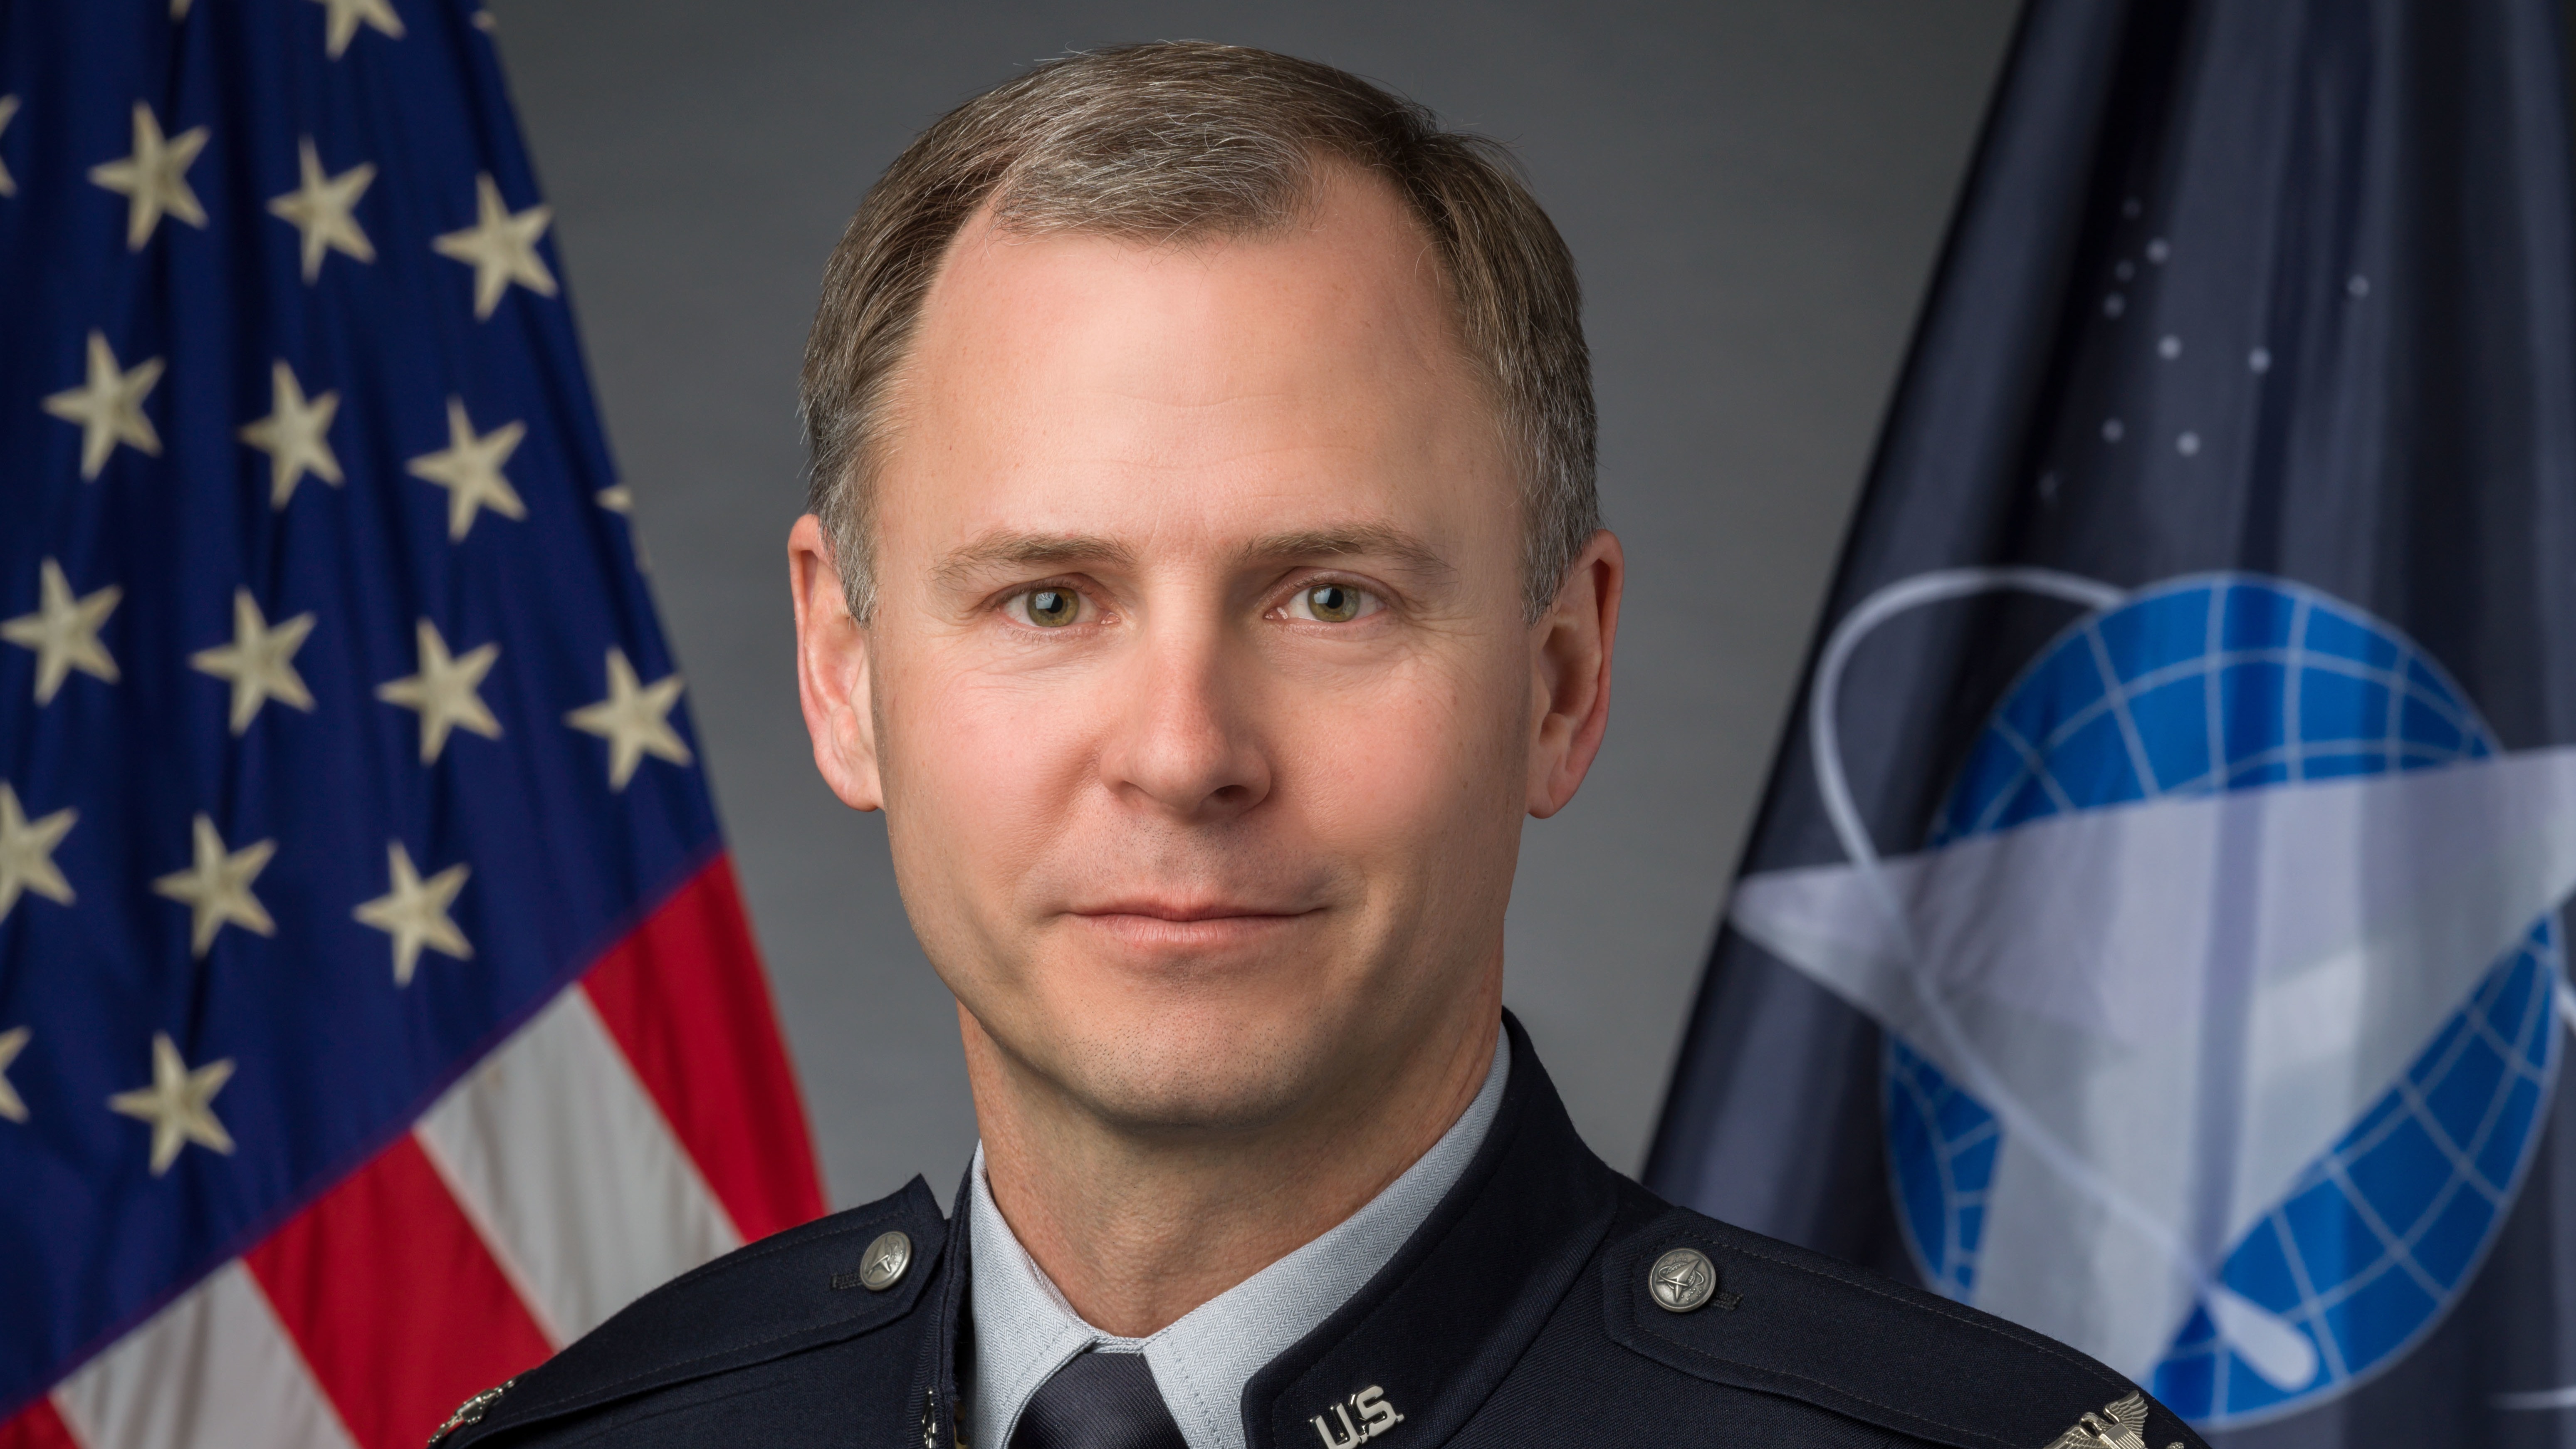 U.S. Space Force Col. Nick Hague will serve as the pilot on NASA’s Space X Crew-9 mission aboard the Dragon spacecraft that will take him and his crewmates to the International Space Station. (U.S. Space Force photo)